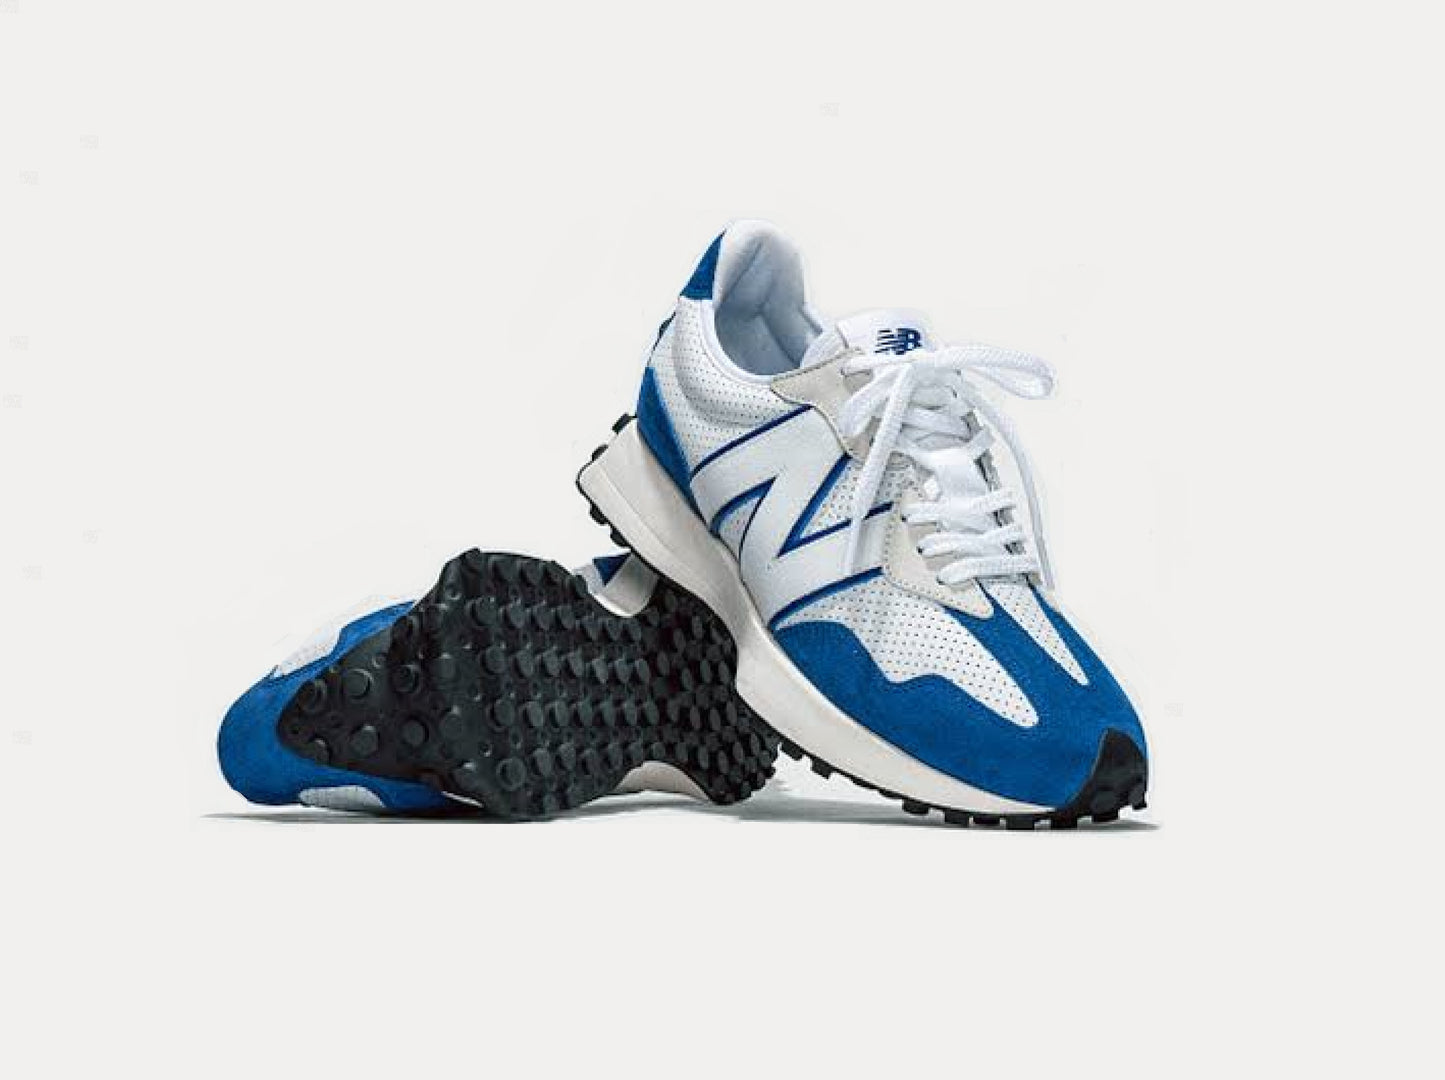 New Balance 327 - Primary Pack Blue